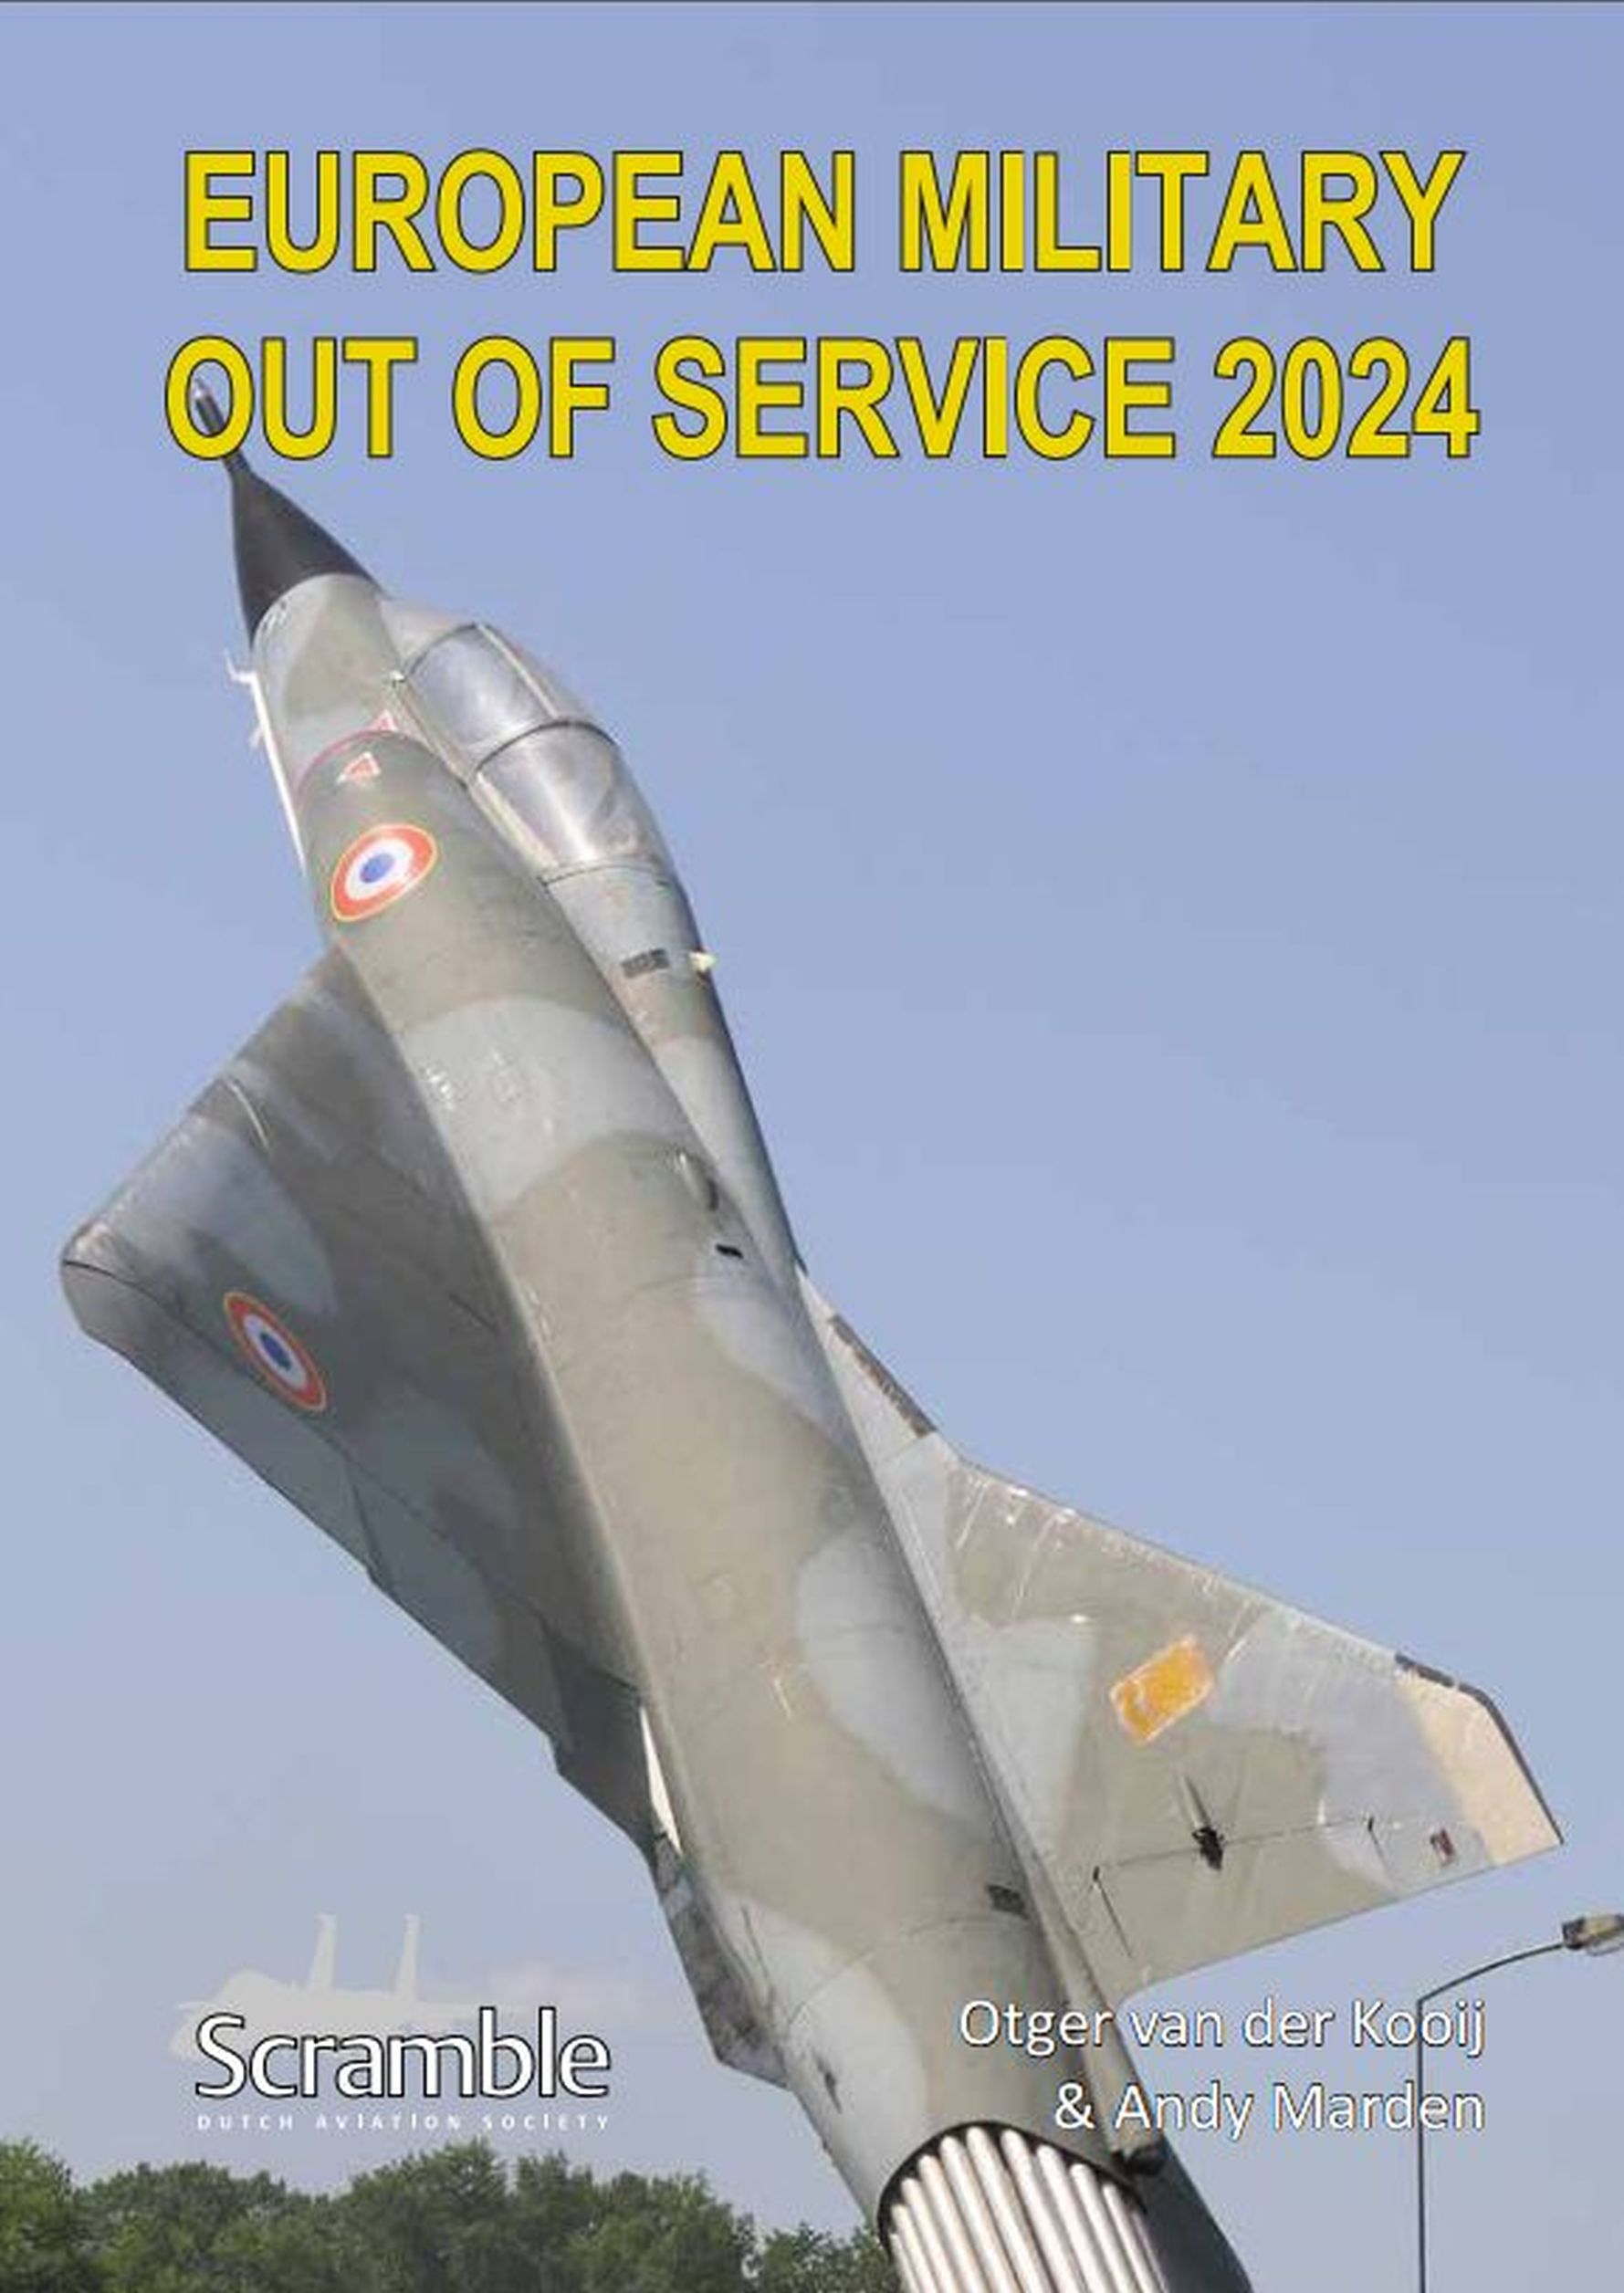 Europ. Military out of Service 2024